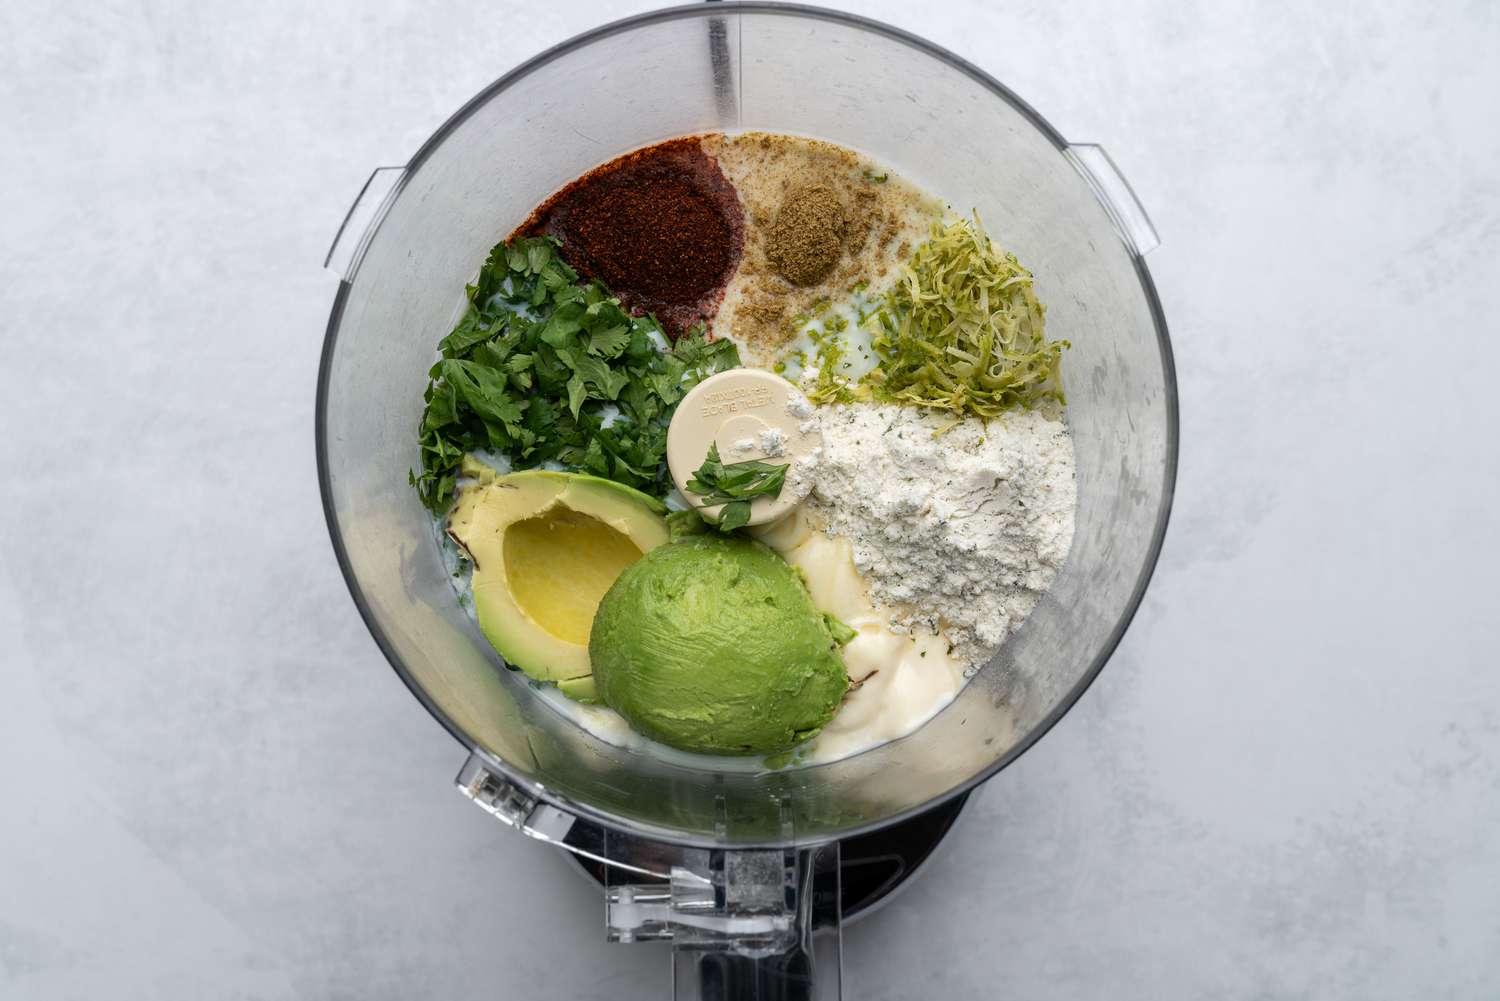 Chick-fil-a Avocado Lime Ranch Dressing ingredients in a food processor